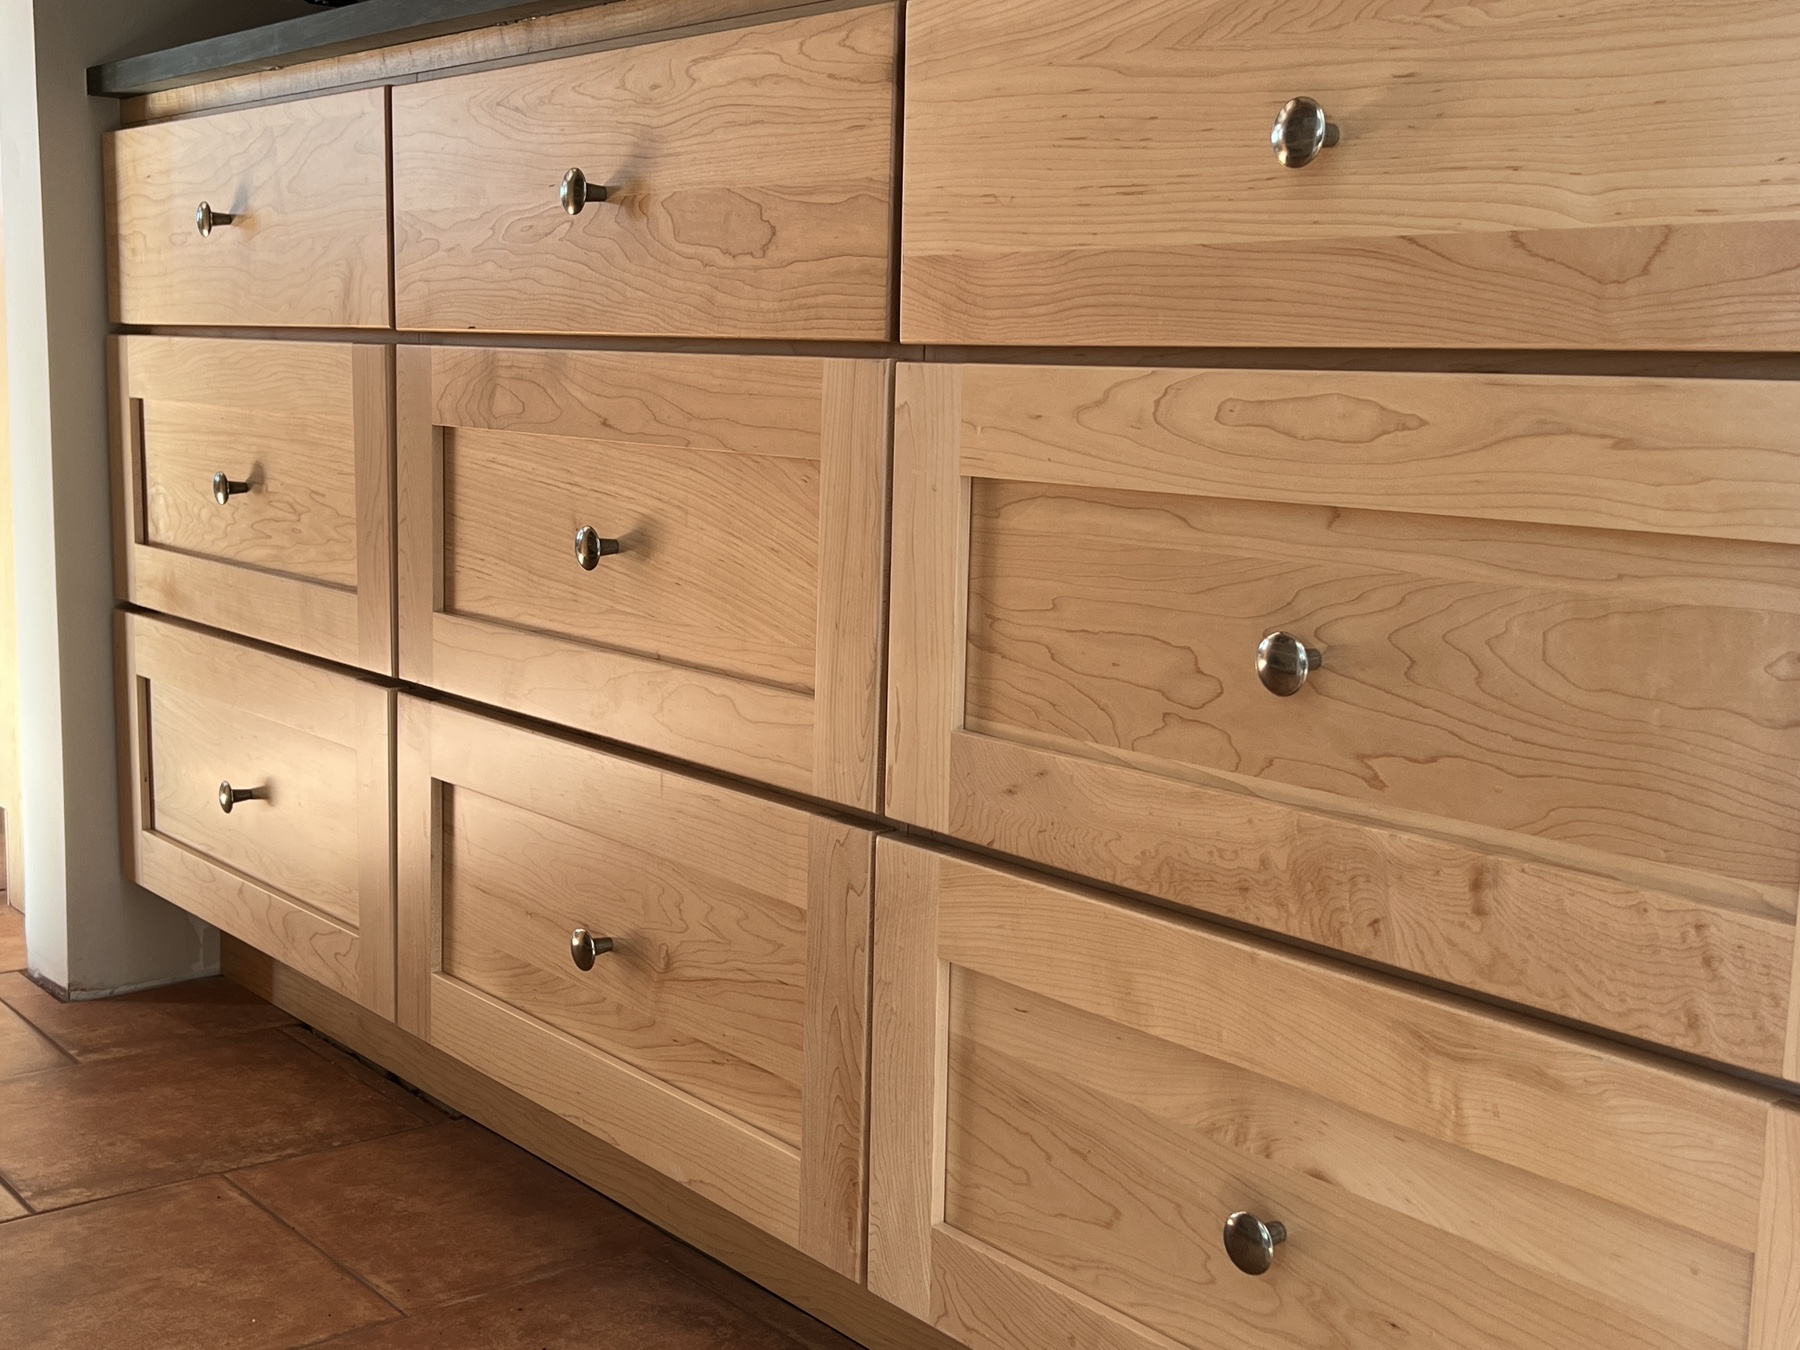 nine drawers in a pantry with shiny pewter knobs freshly installed